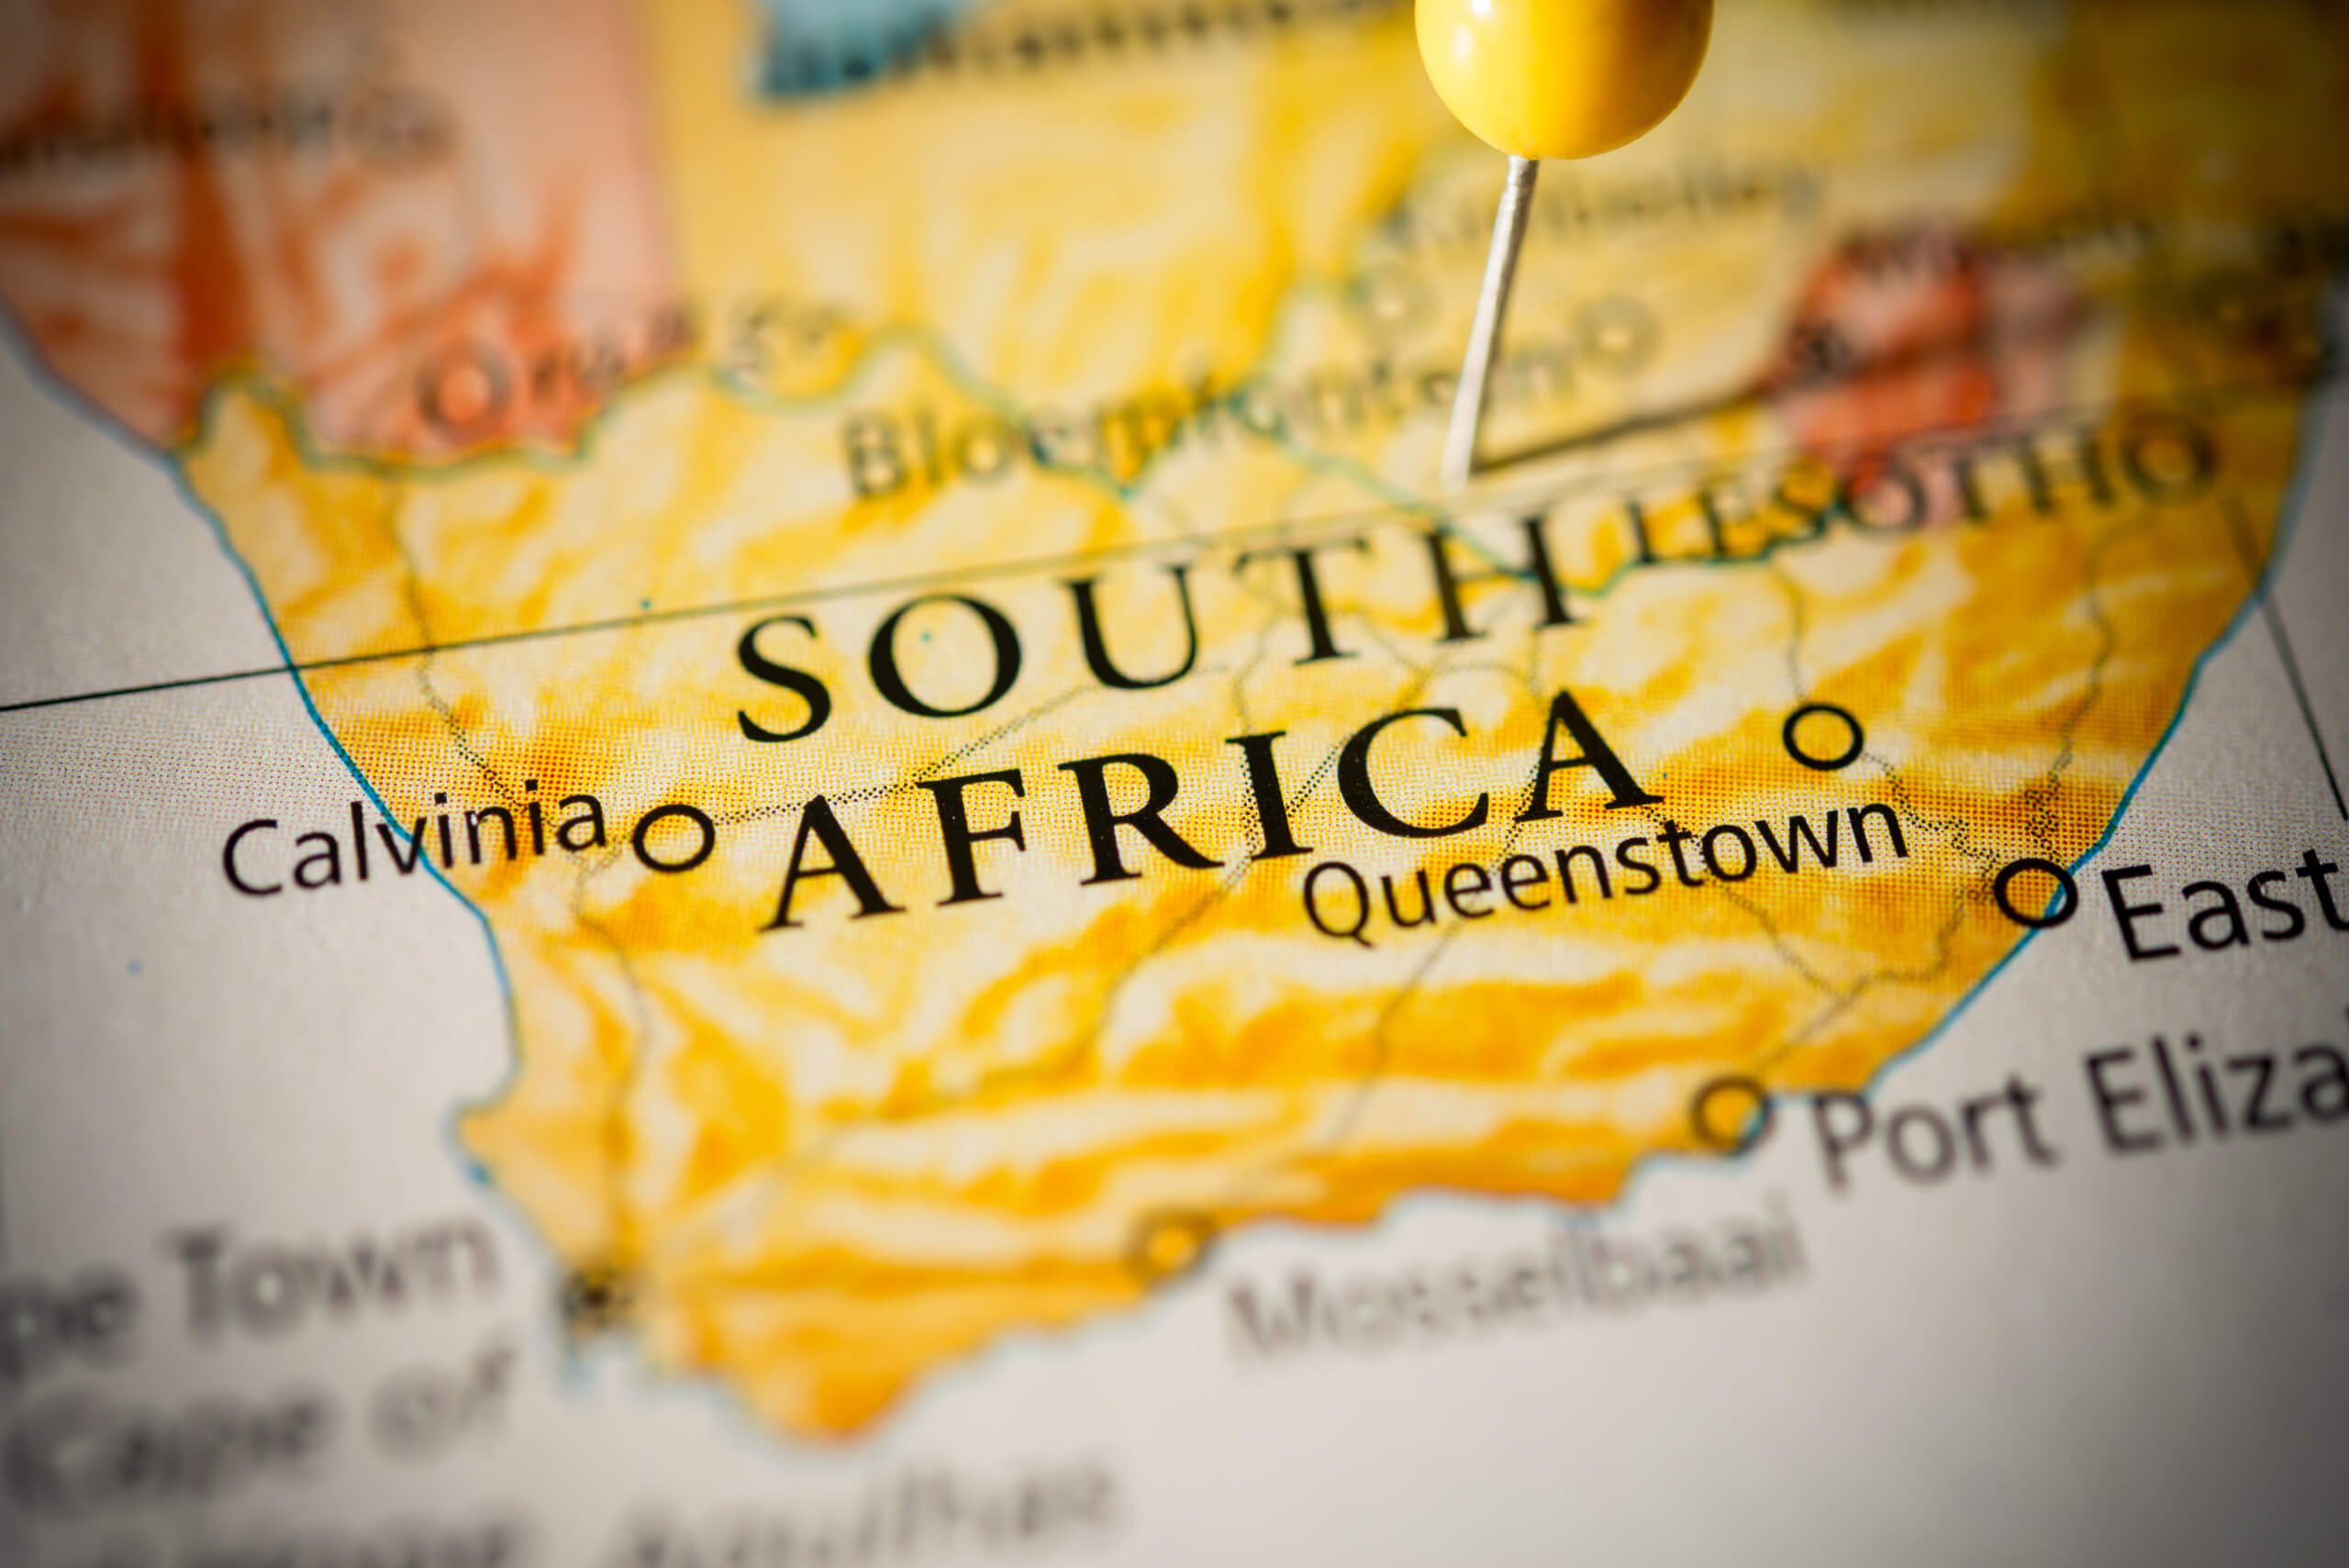 South Africa’s hydrogen ecosystem to benefit from new major agreement